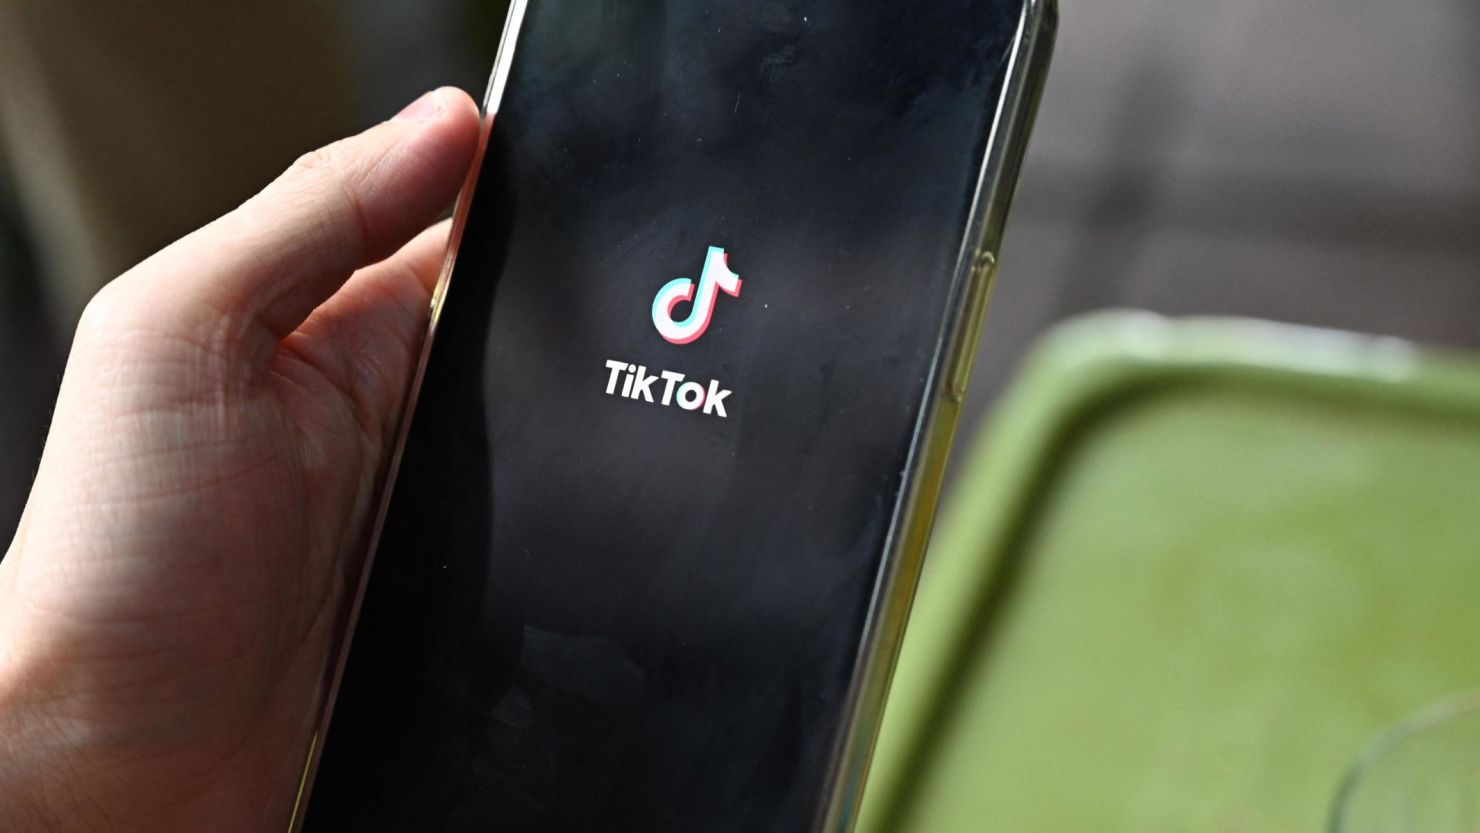 The logo of the social media platform TikTok is displayed on a mobile phone in Hanoi on October 6, 2023. Social media platforms operating in Vietnam including TikTok and Facebook removed nearly 800 posts containing "false or anti-state" information over the course of a month, state media said October 6, citing government figures. (Photo by Nhac NGUYEN / AFP) (Photo by NHAC NGUYEN/AFP via Getty Images)